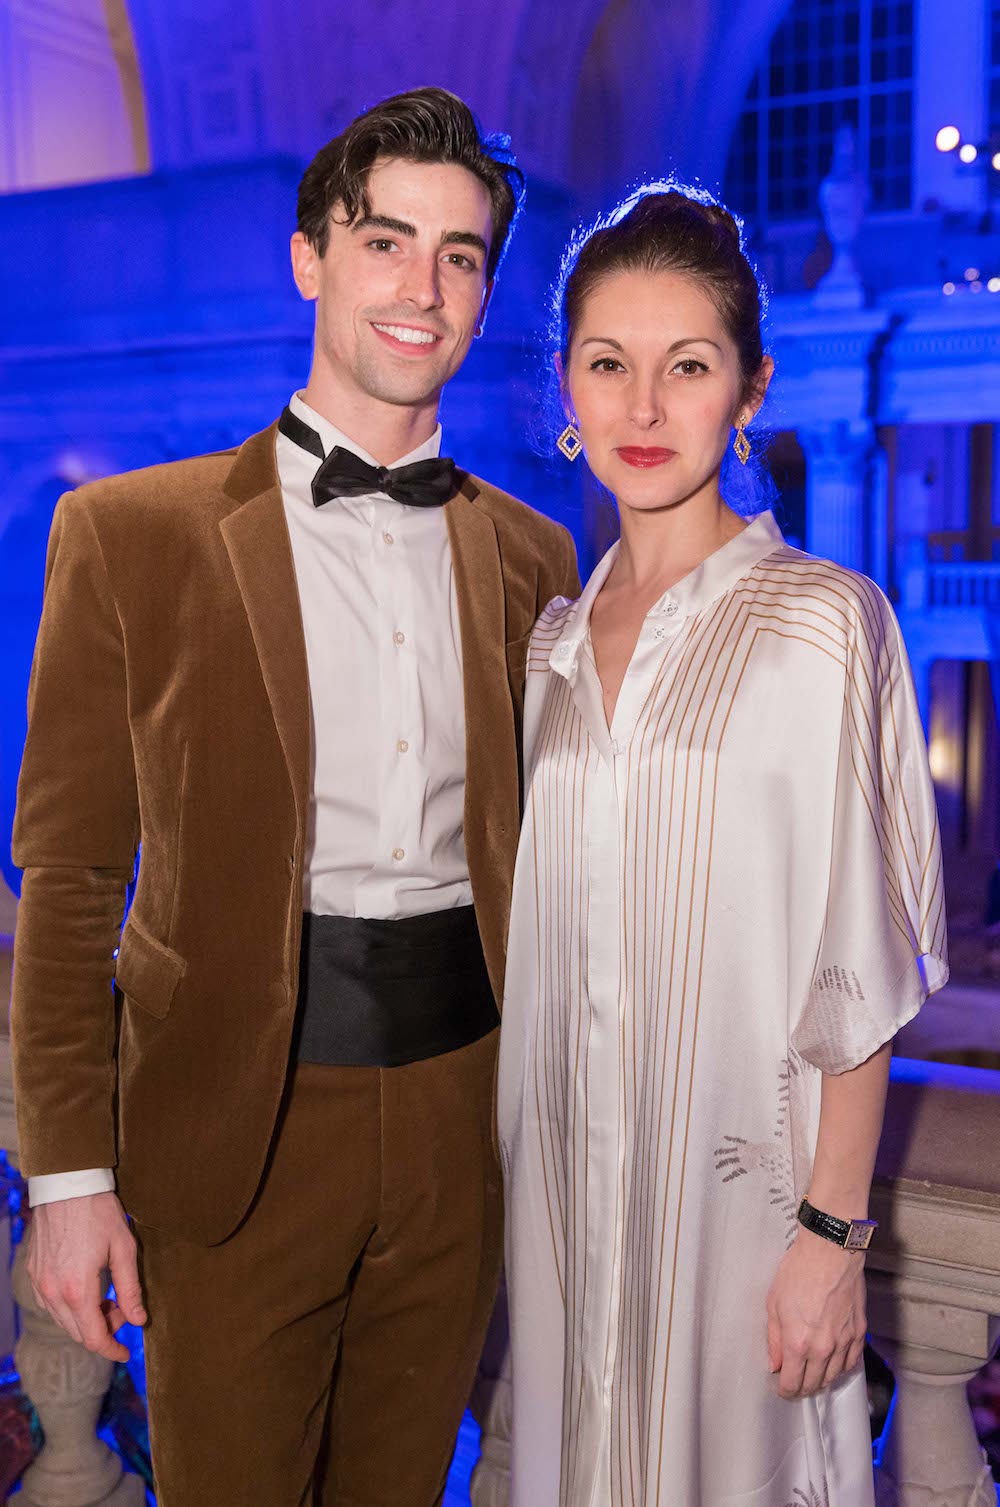 Joseph Walsh and Lauren Strongin at the 2016 opening night gala's after party